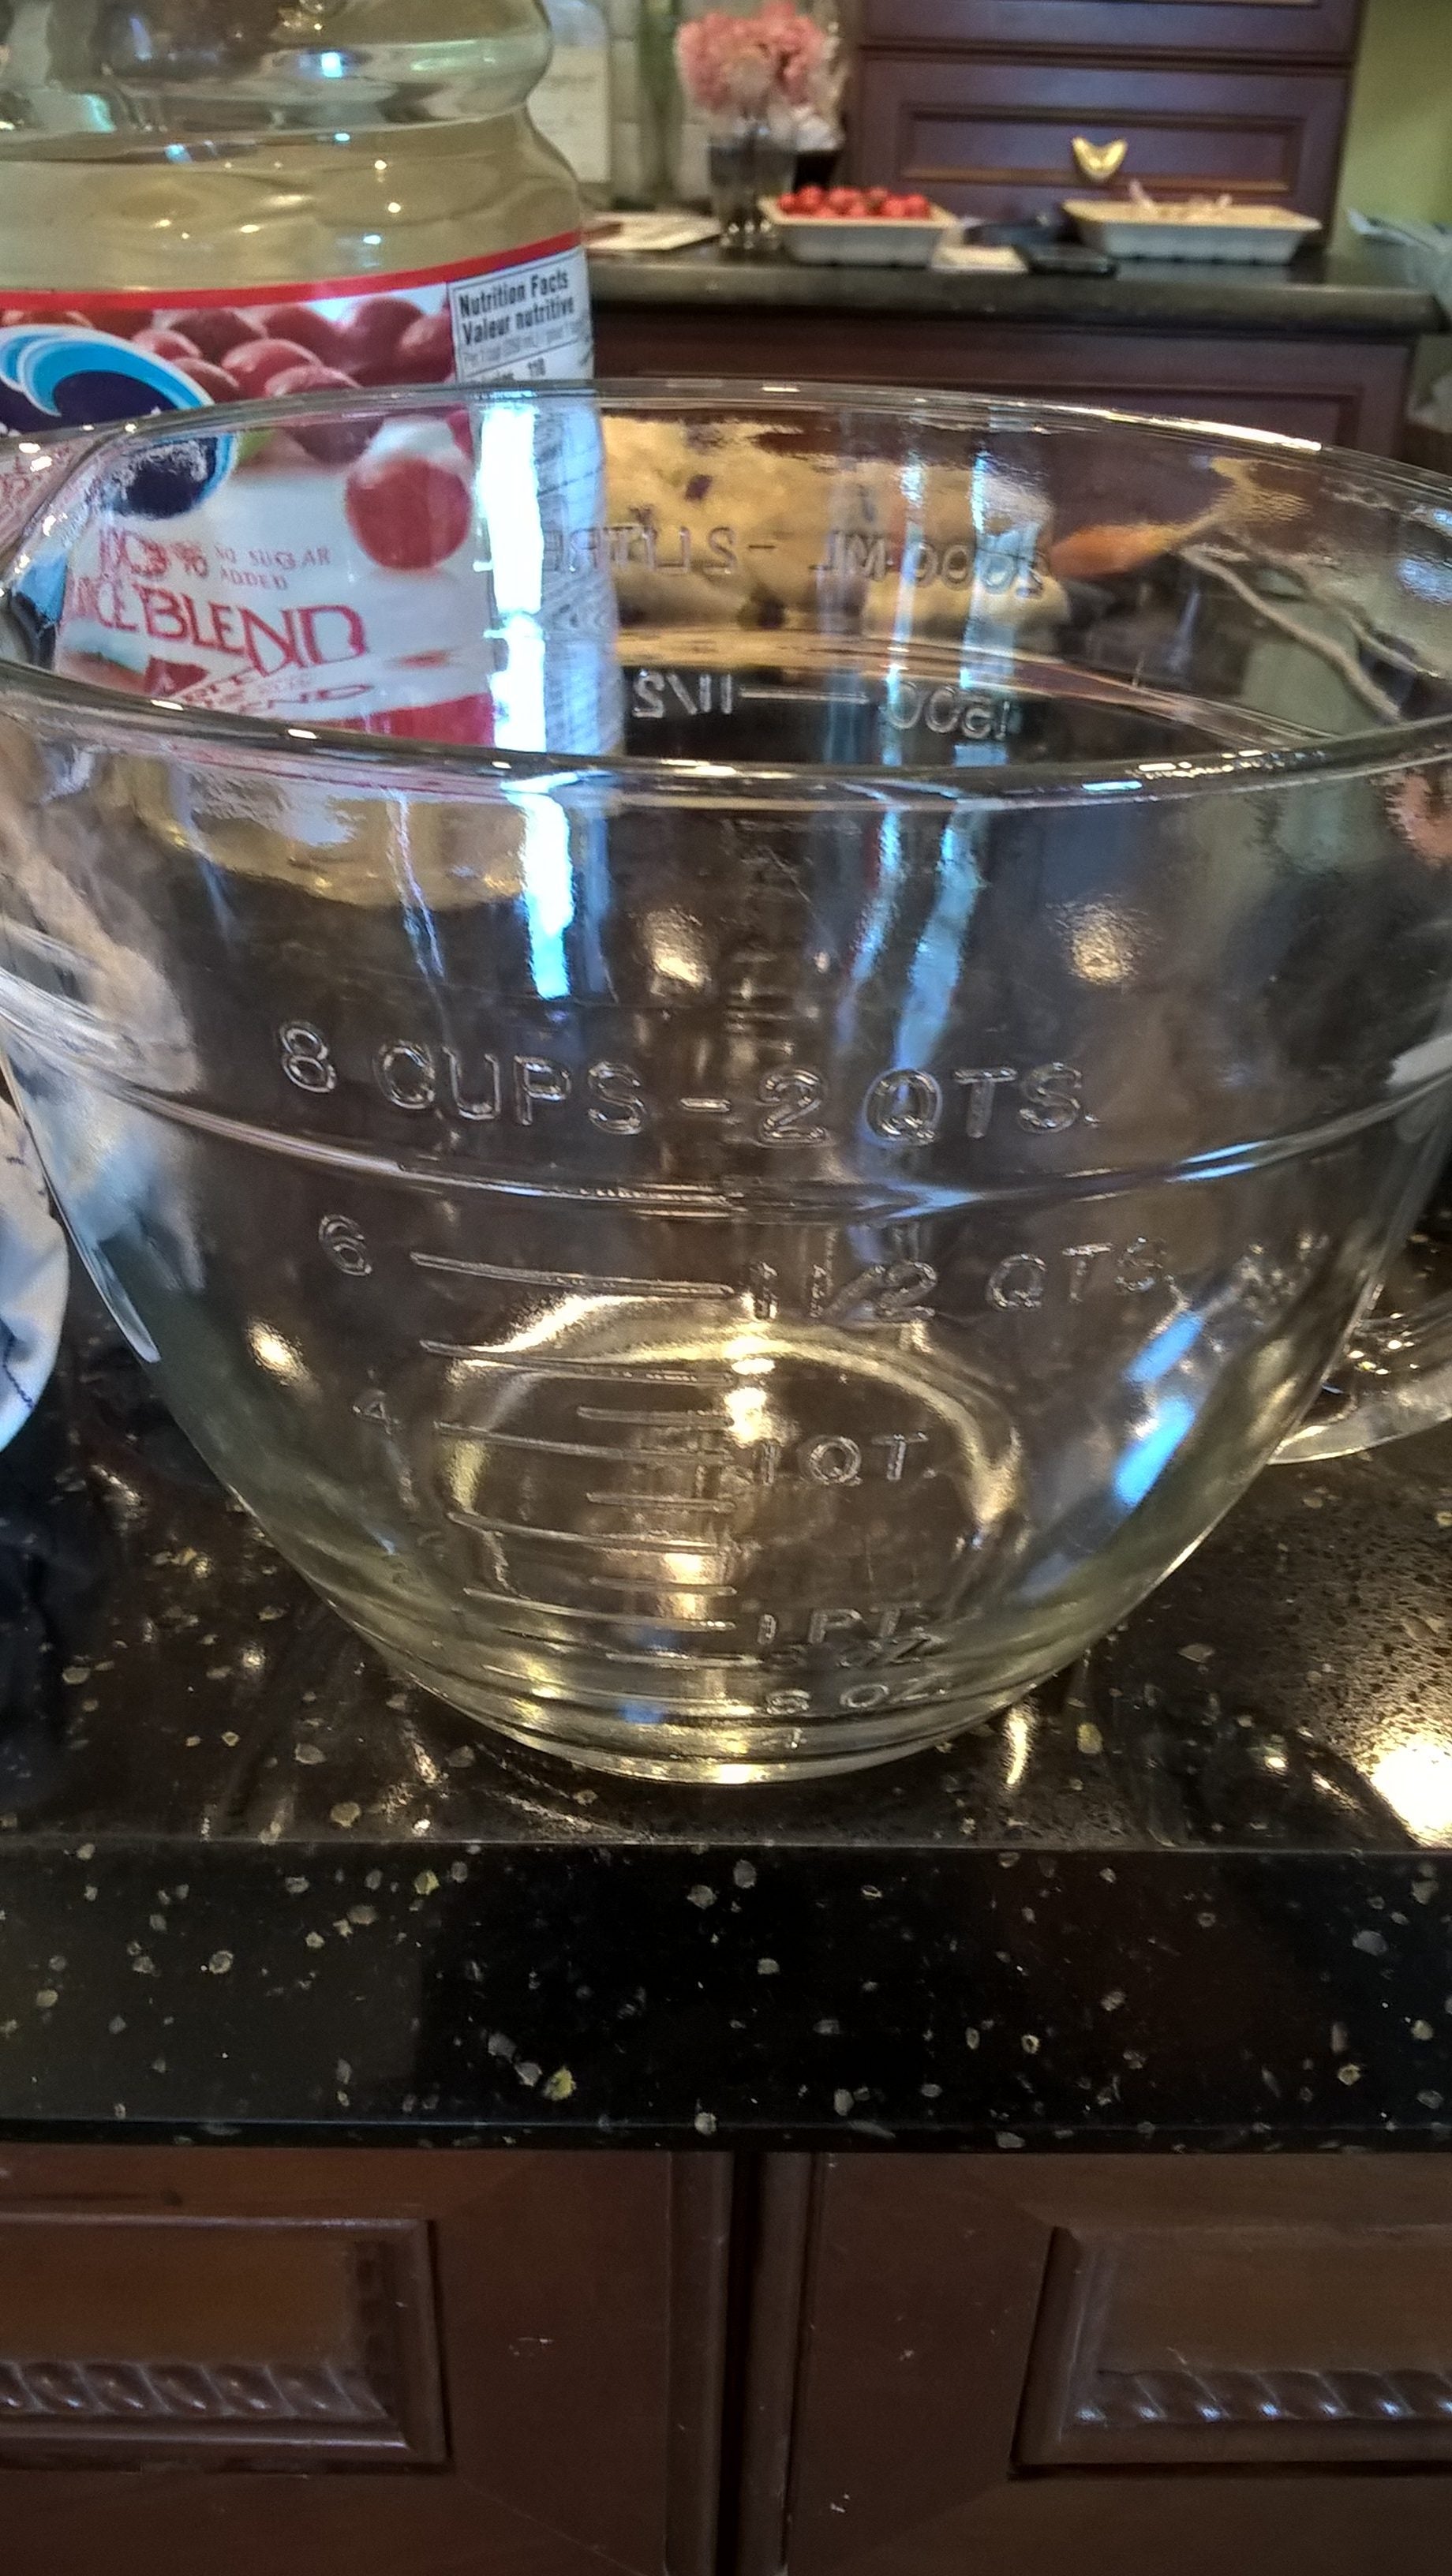 How old is my Pyrex measuring cup? • Sarah's Bites